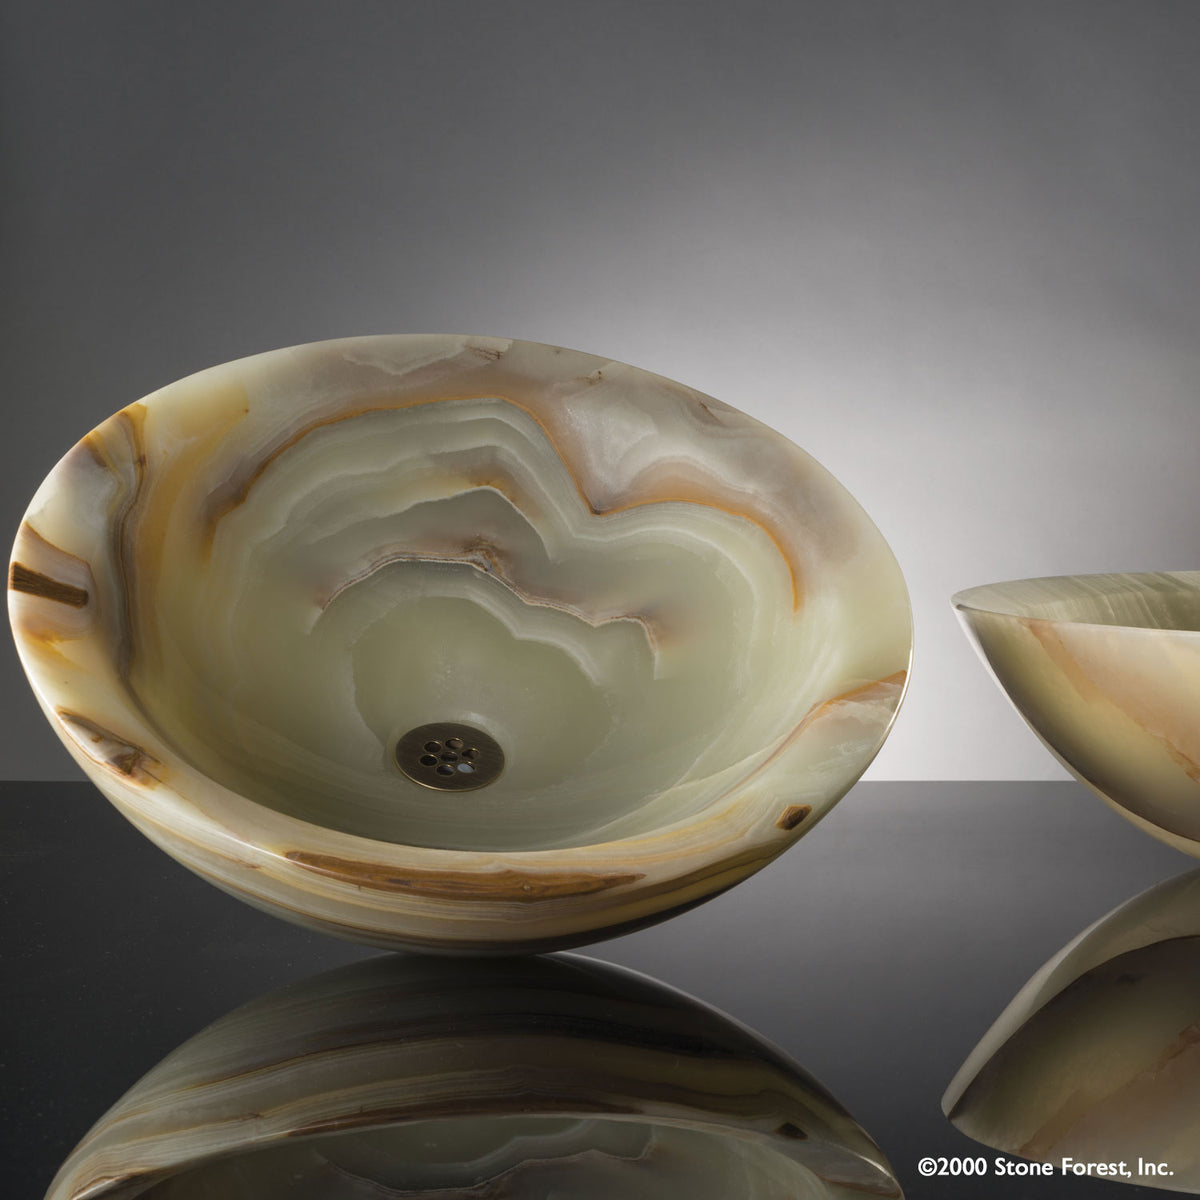  Beveled Round vessel sink carved  from multi-onyx with a polished  finish. image 1 of 3